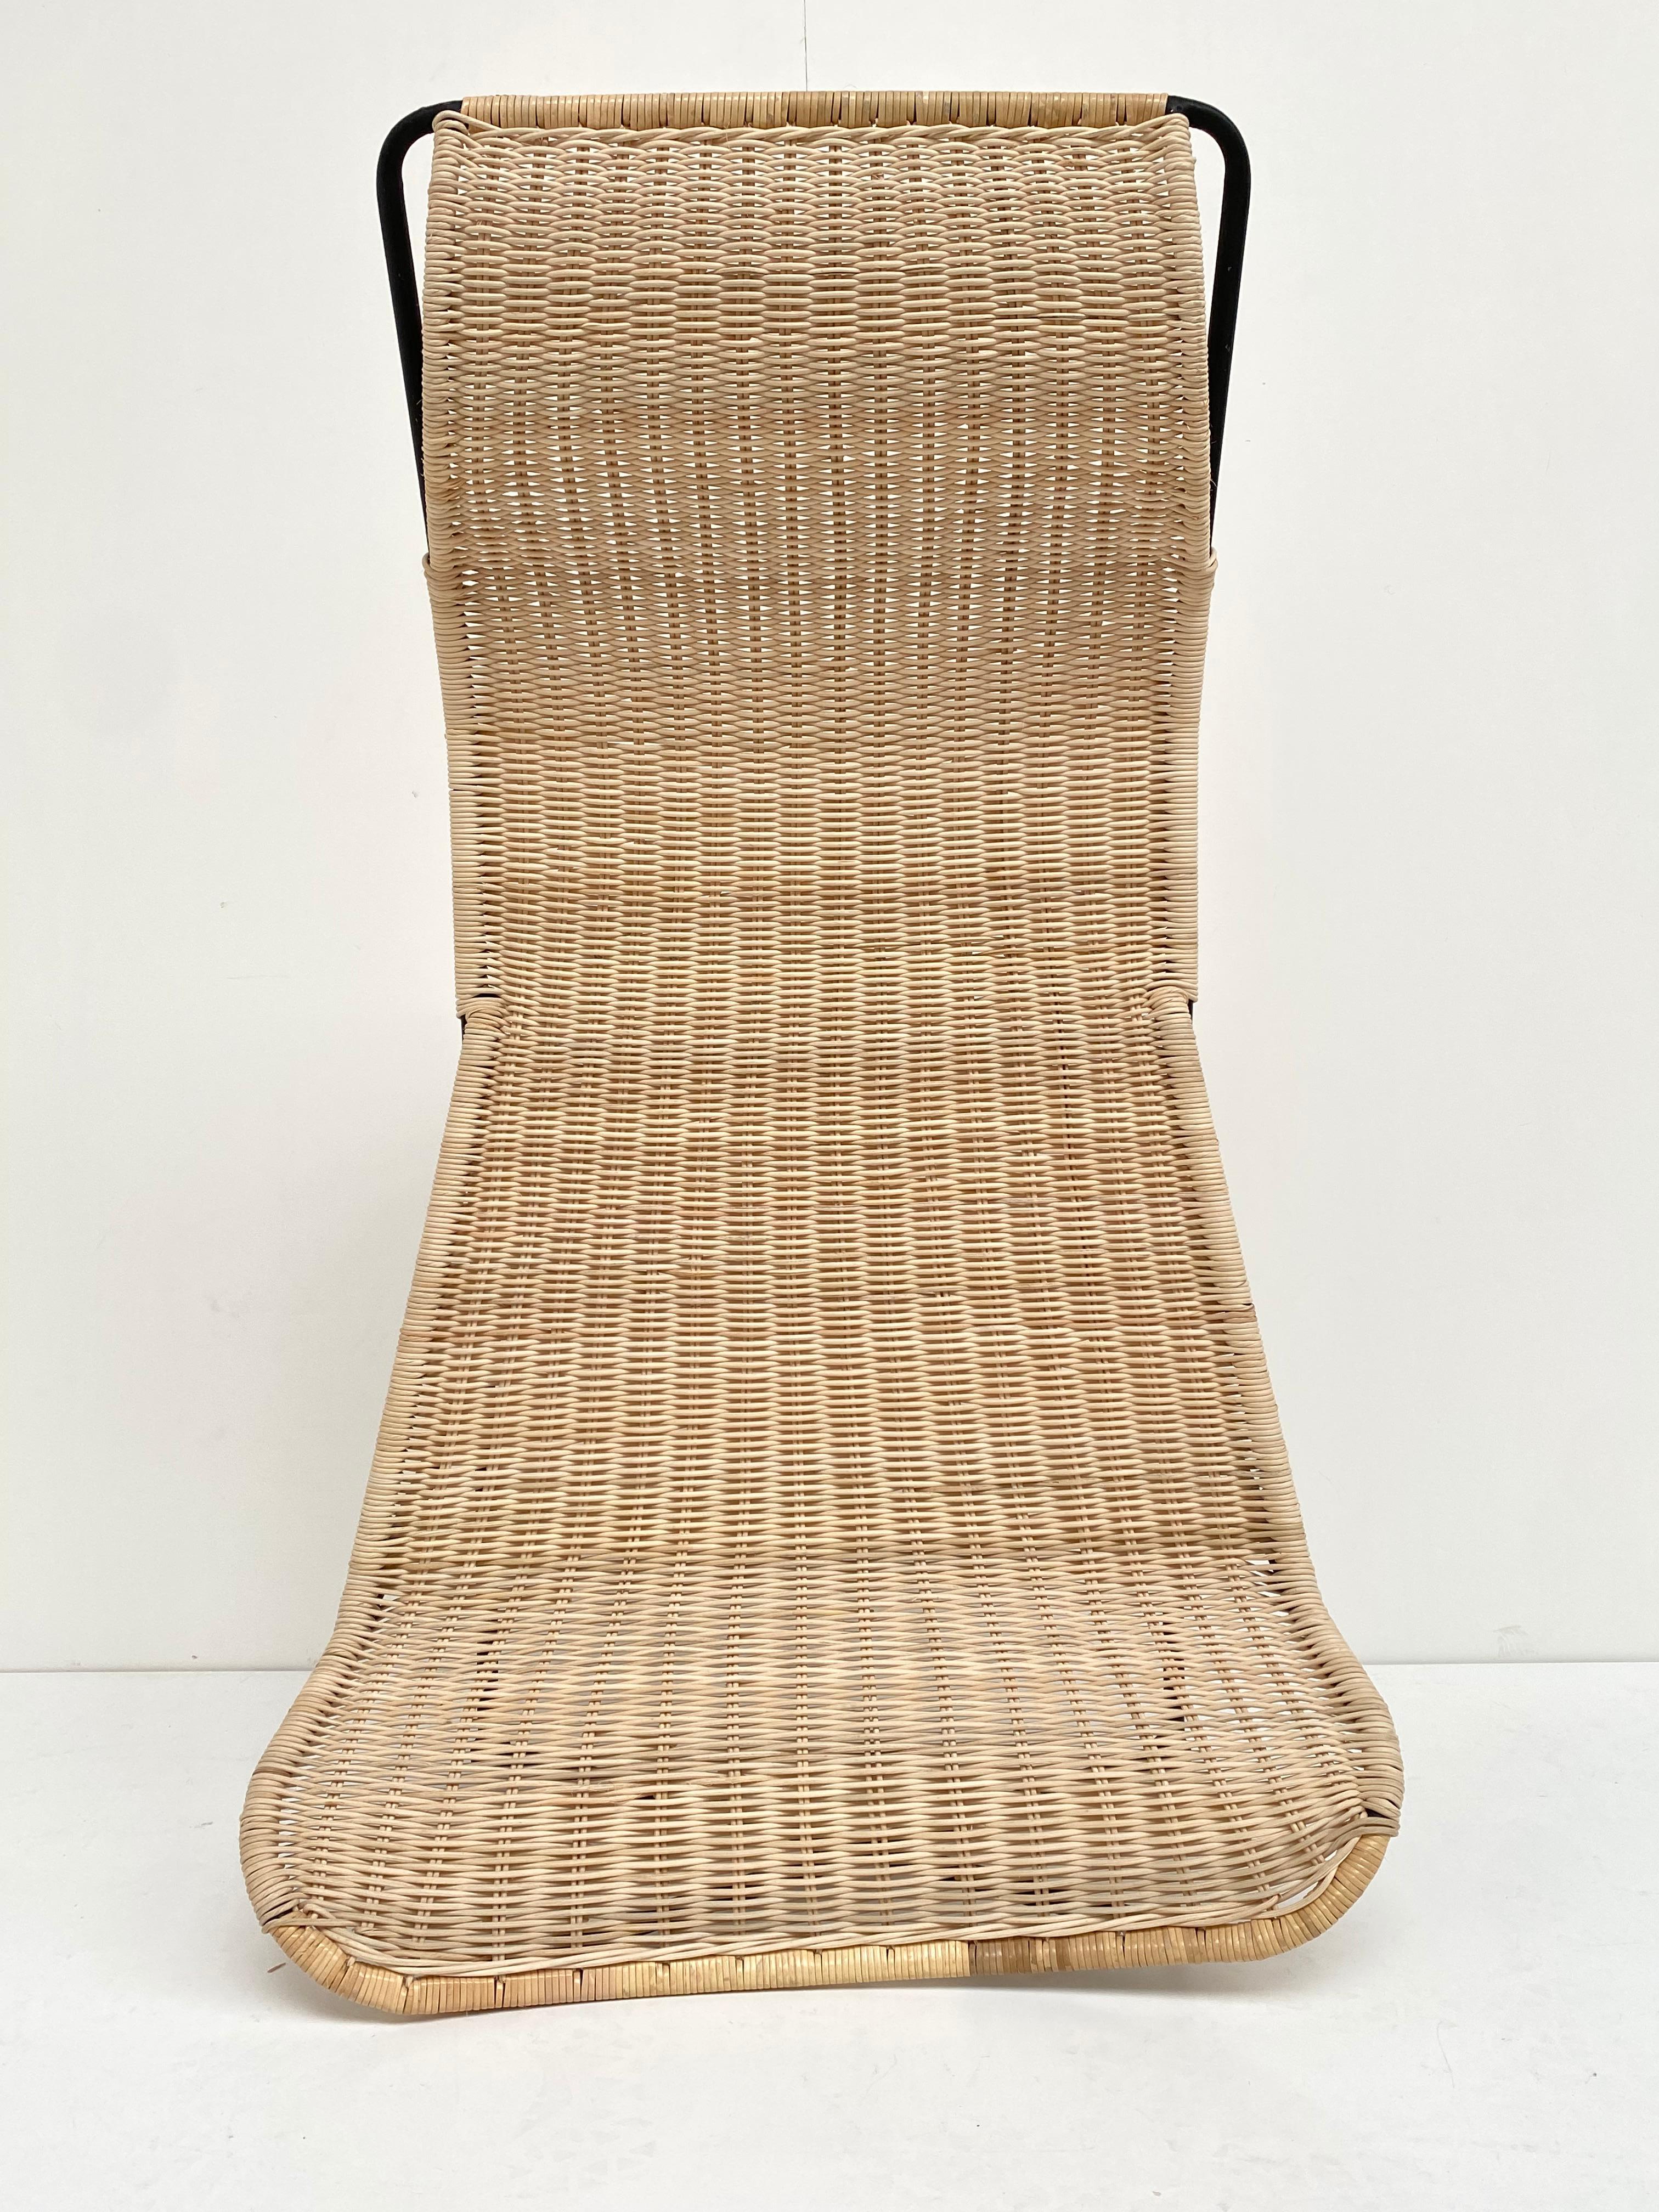 Stunning Sculptural Form Wicker Chaise Attributed to Raoul Guys, France, 1950's For Sale 8